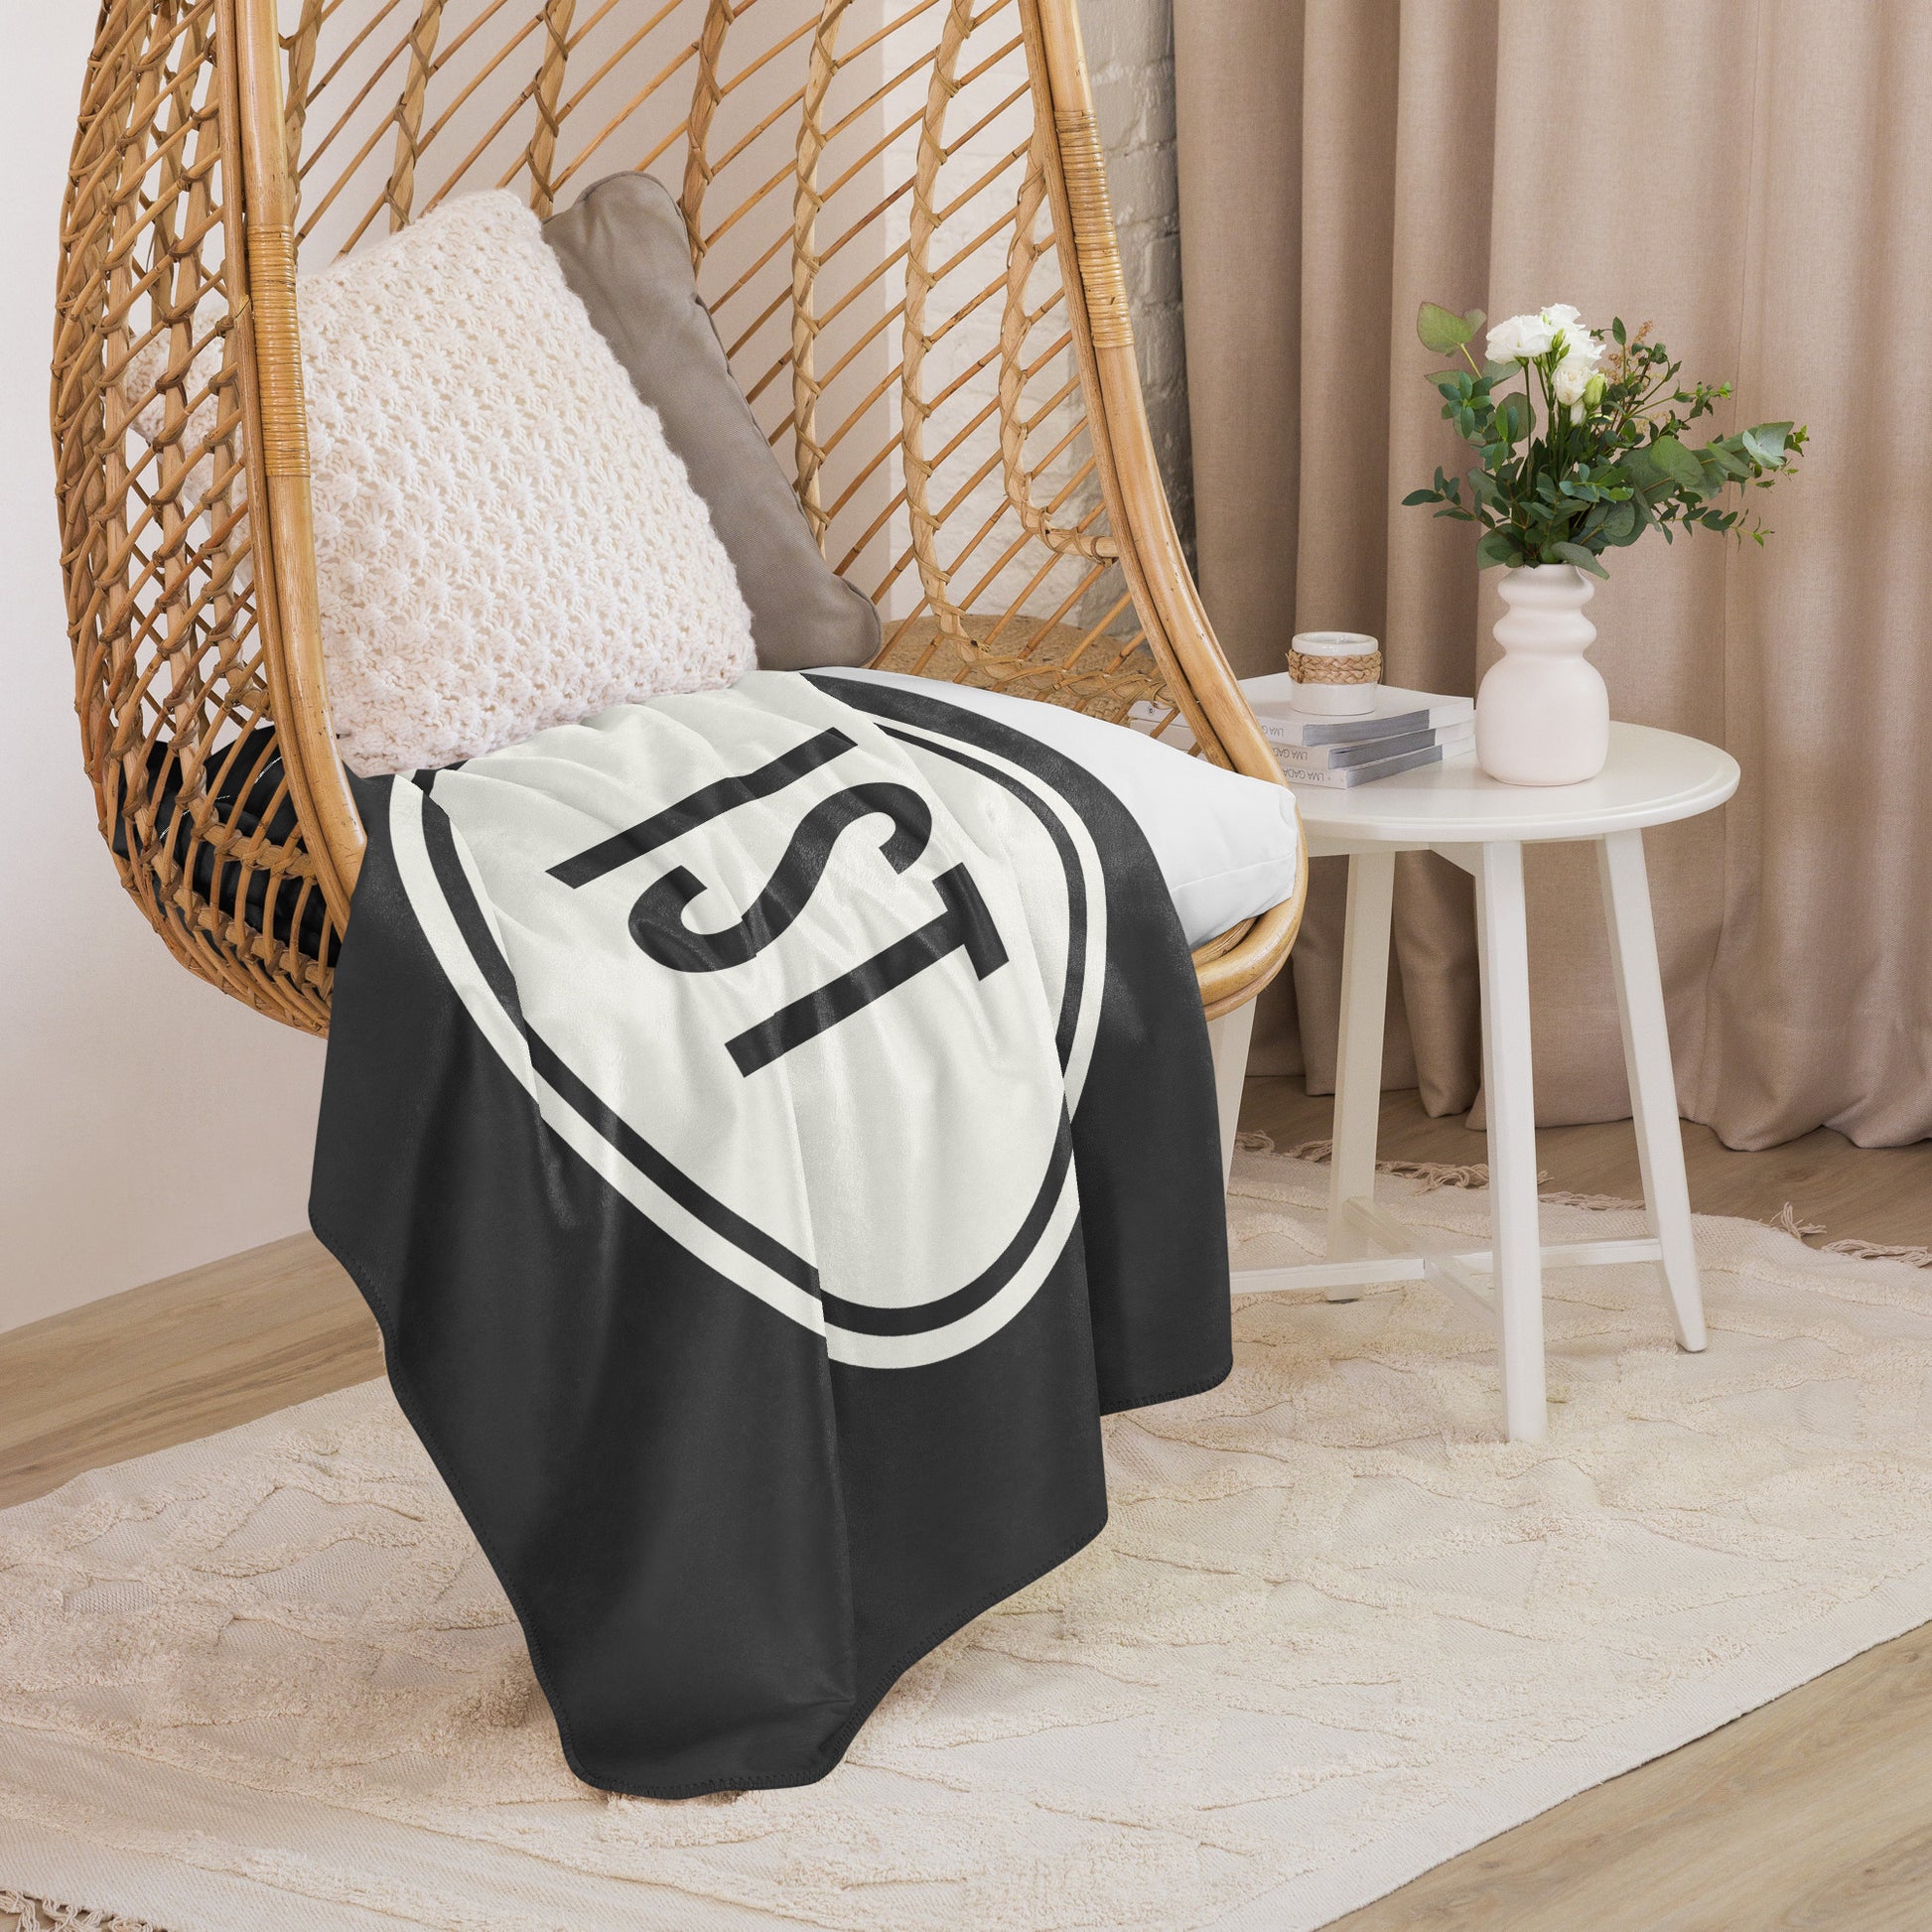 Unique Travel Gift Sherpa Blanket - White Oval • IST Istanbul • YHM Designs - Image 06